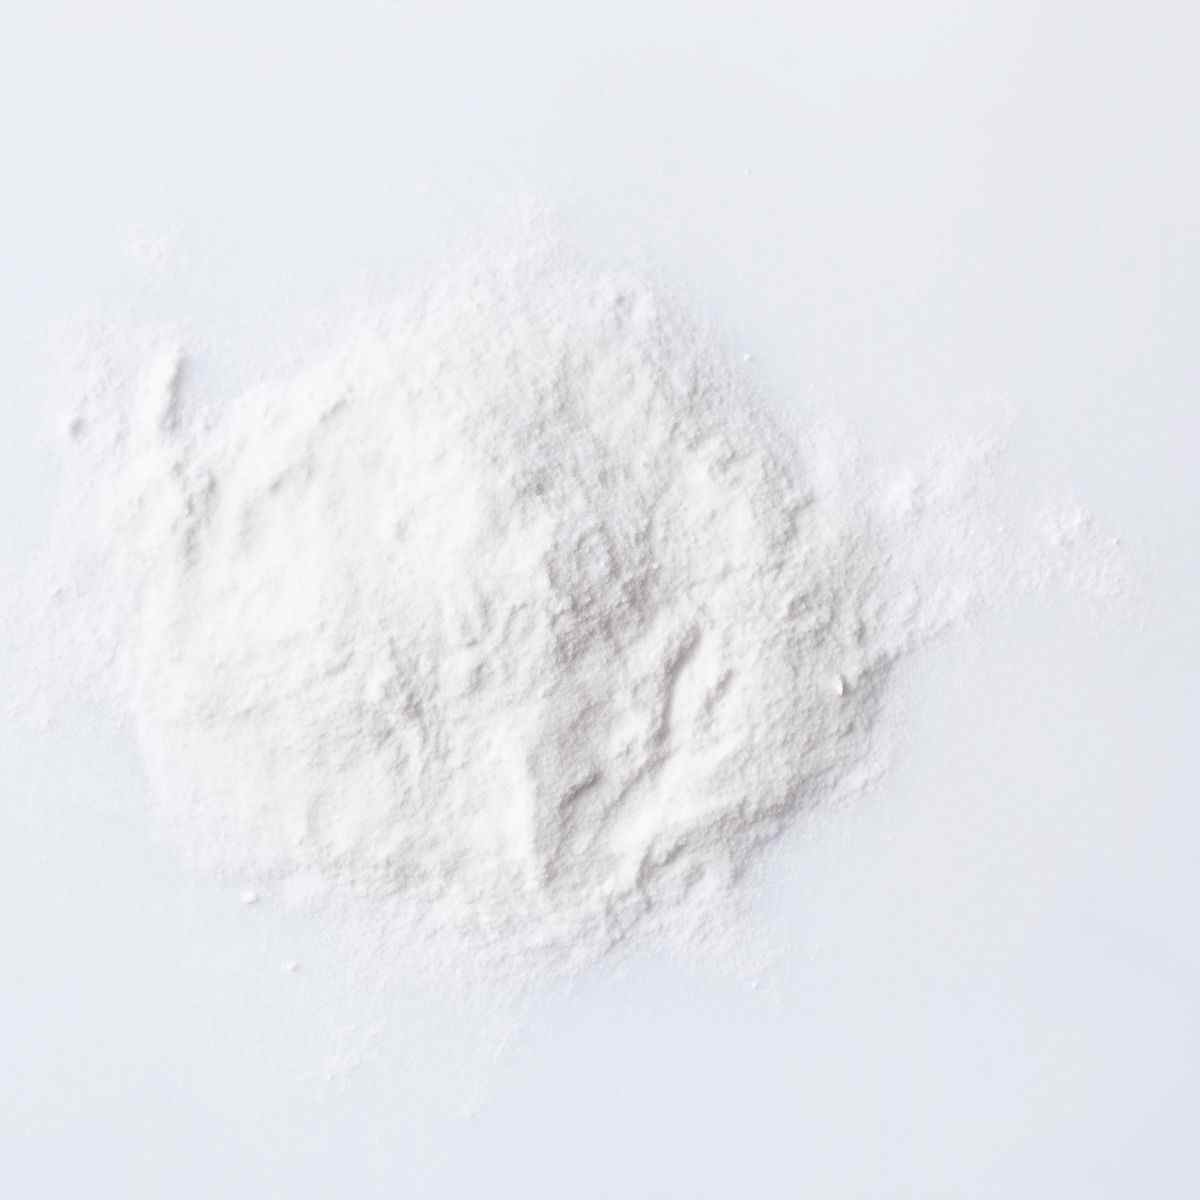 xanthan gum on a white background.